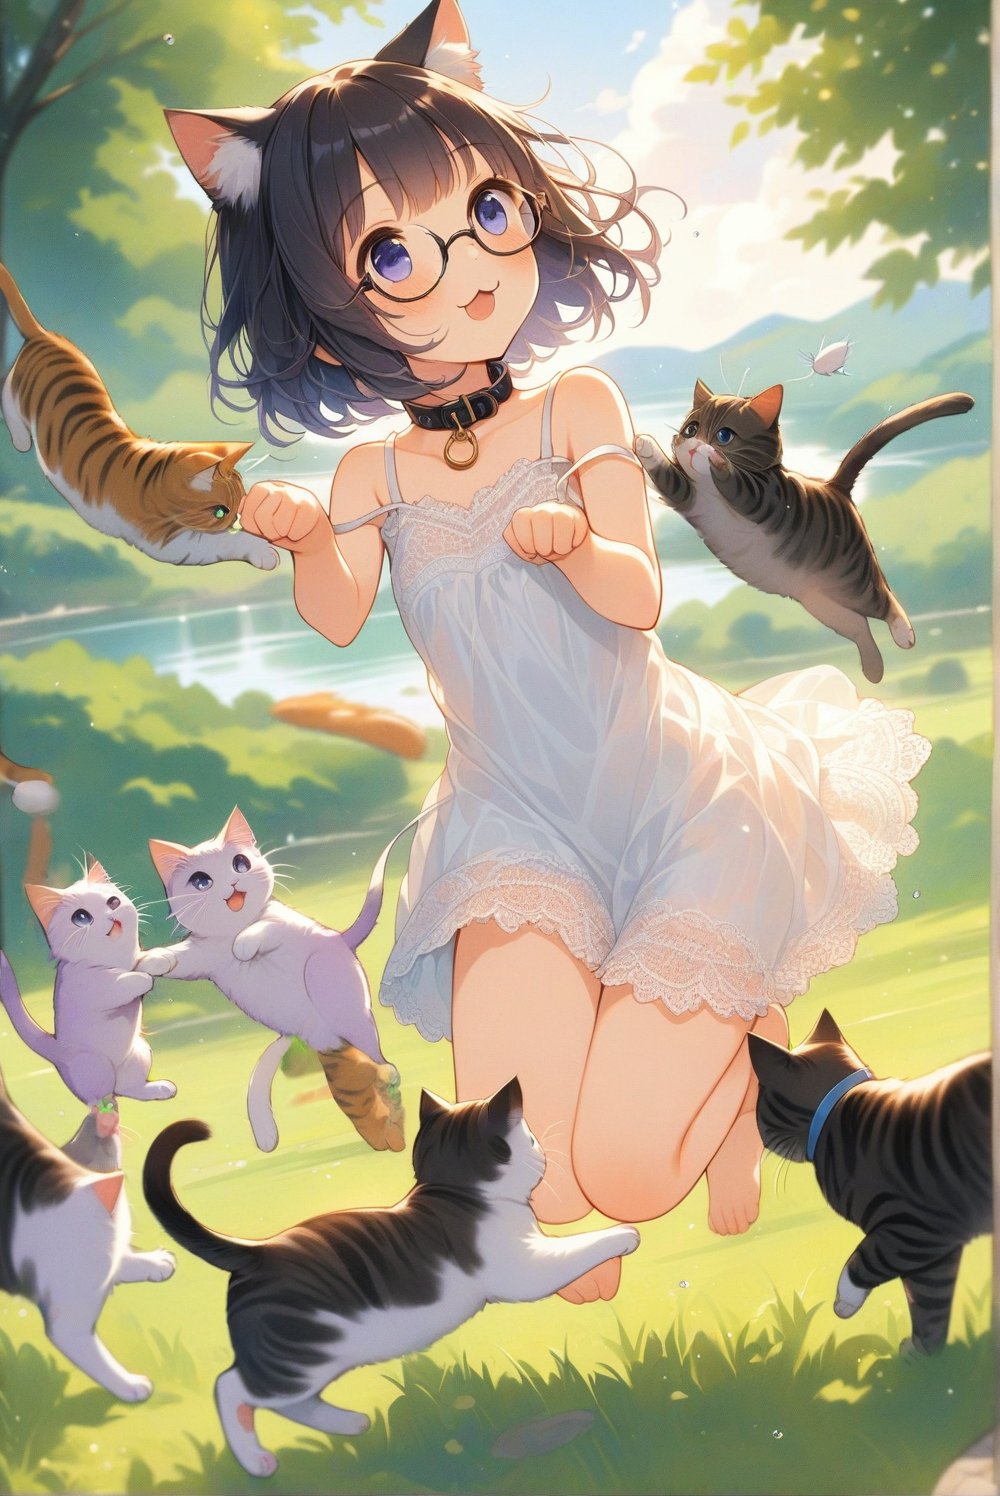 beautiful details, uniform 8K wallpaper, high resolution, exquisite texture in every detail,  beautiful illustration,manga touch

1girl, (((very young girl))), shyness,
summer, japanese countryside, in lakeside,
white Summer-like camisole dress , blue line ribbon, lots of lace,

((nekomimi)),Cat ears the same color as her hair,
short hair, open mouth, (glasses), round eyes, cat collar, , black hair, smile, :3,

in the park, play with cats,
frying,  jumping, fluttering in the wind,

shot angle is slightly tilted, adding dynamic movement to the shot, shot from side and below,
, looking at another, look away, looking at cats,
hands in cat, arms up,


nekomimimeganekao